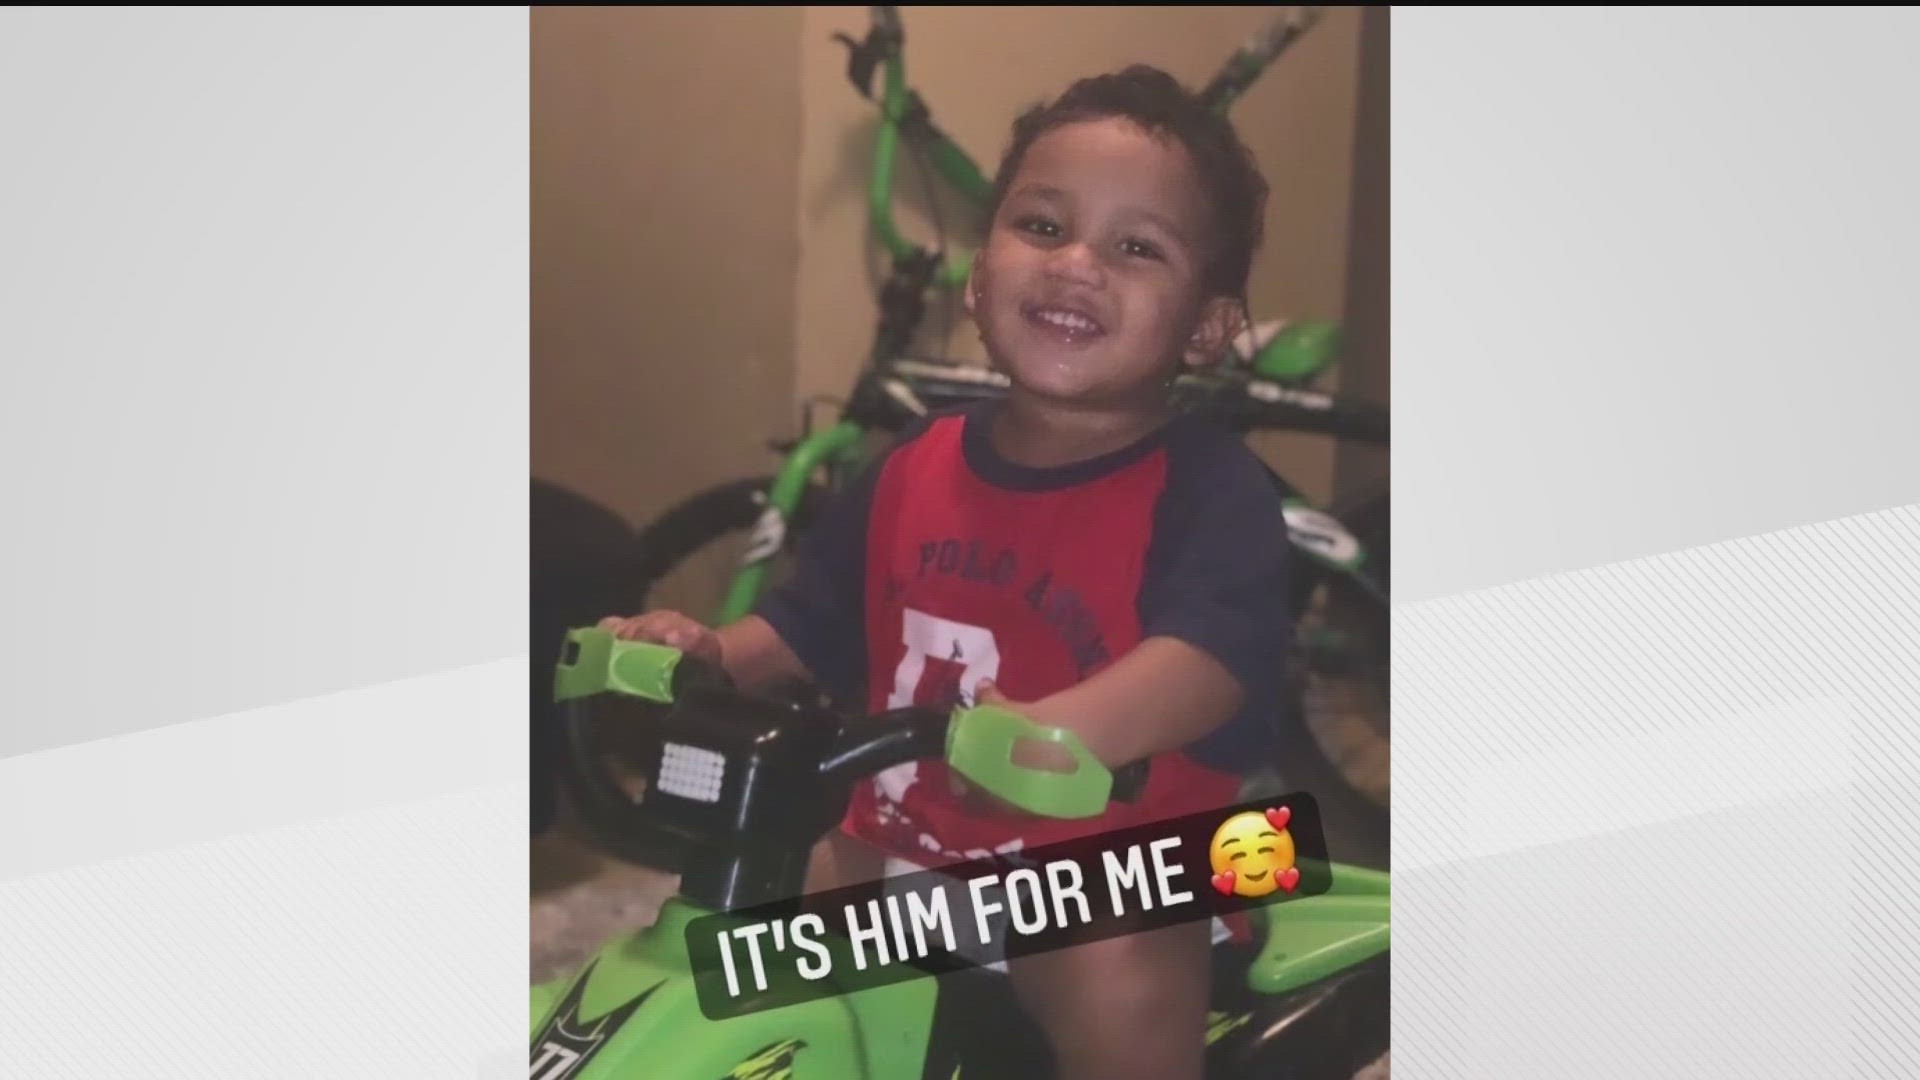 A mother is grieving after two of her kids were shot Friday in Athens, with her 3-year-old son sadly passing away.